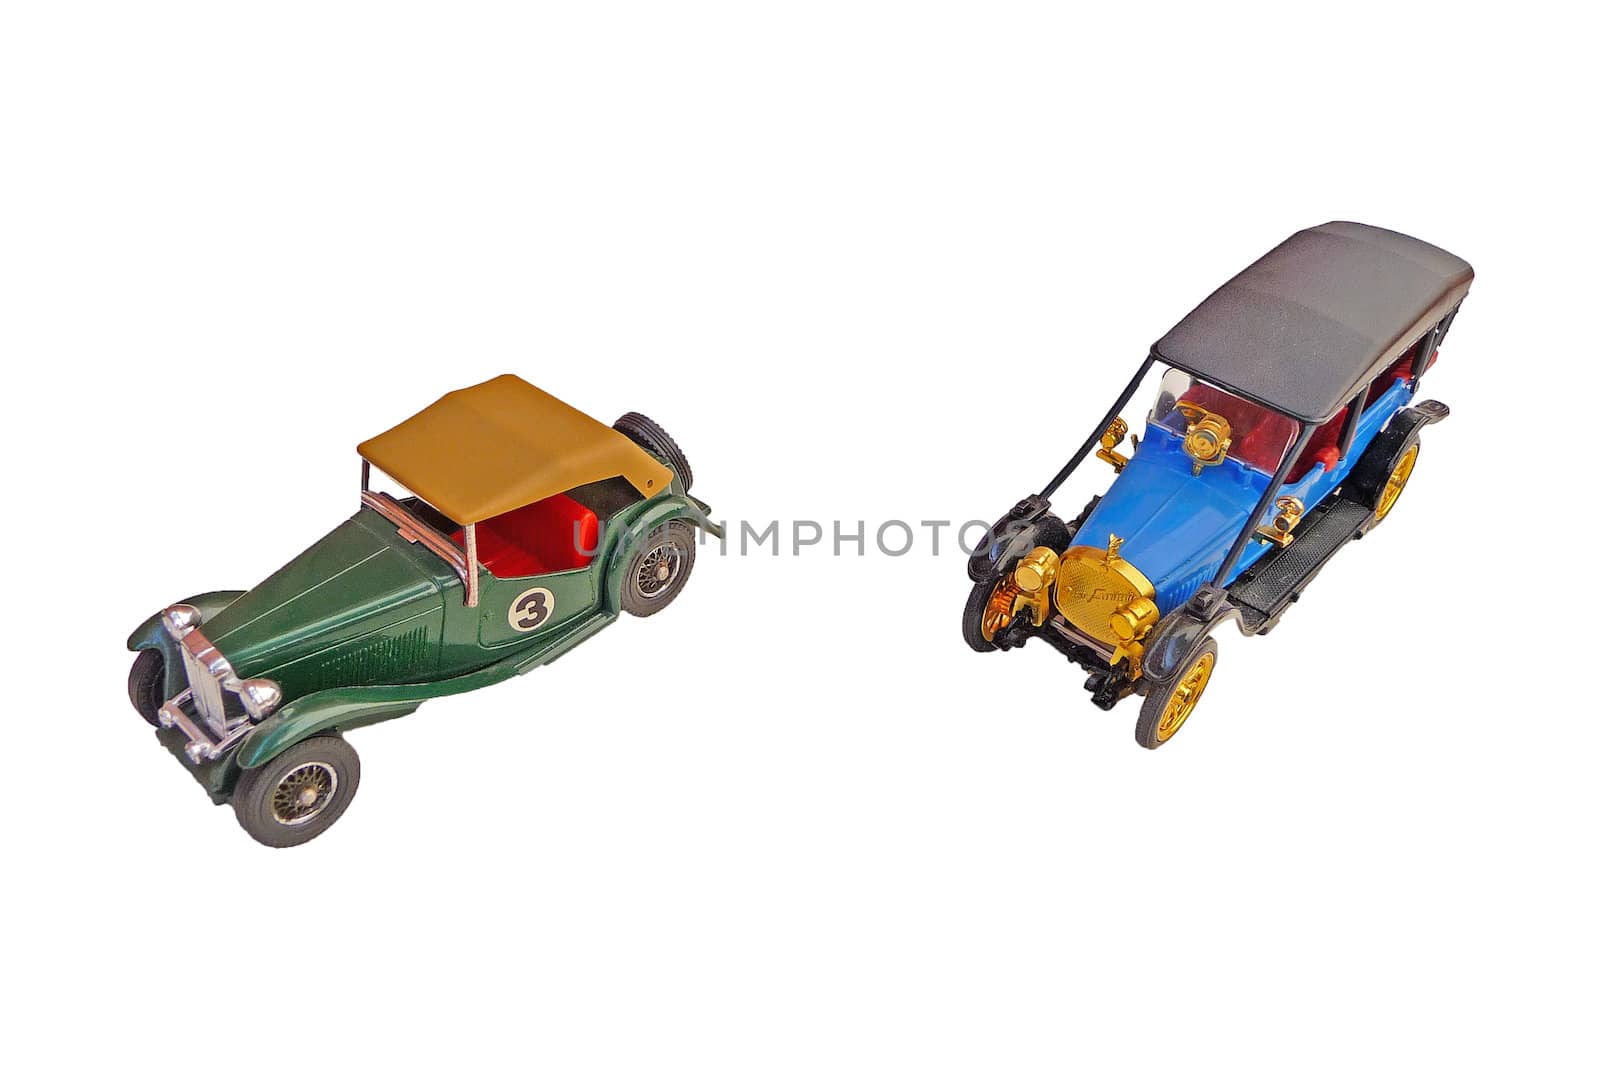 Two models of ancient cars